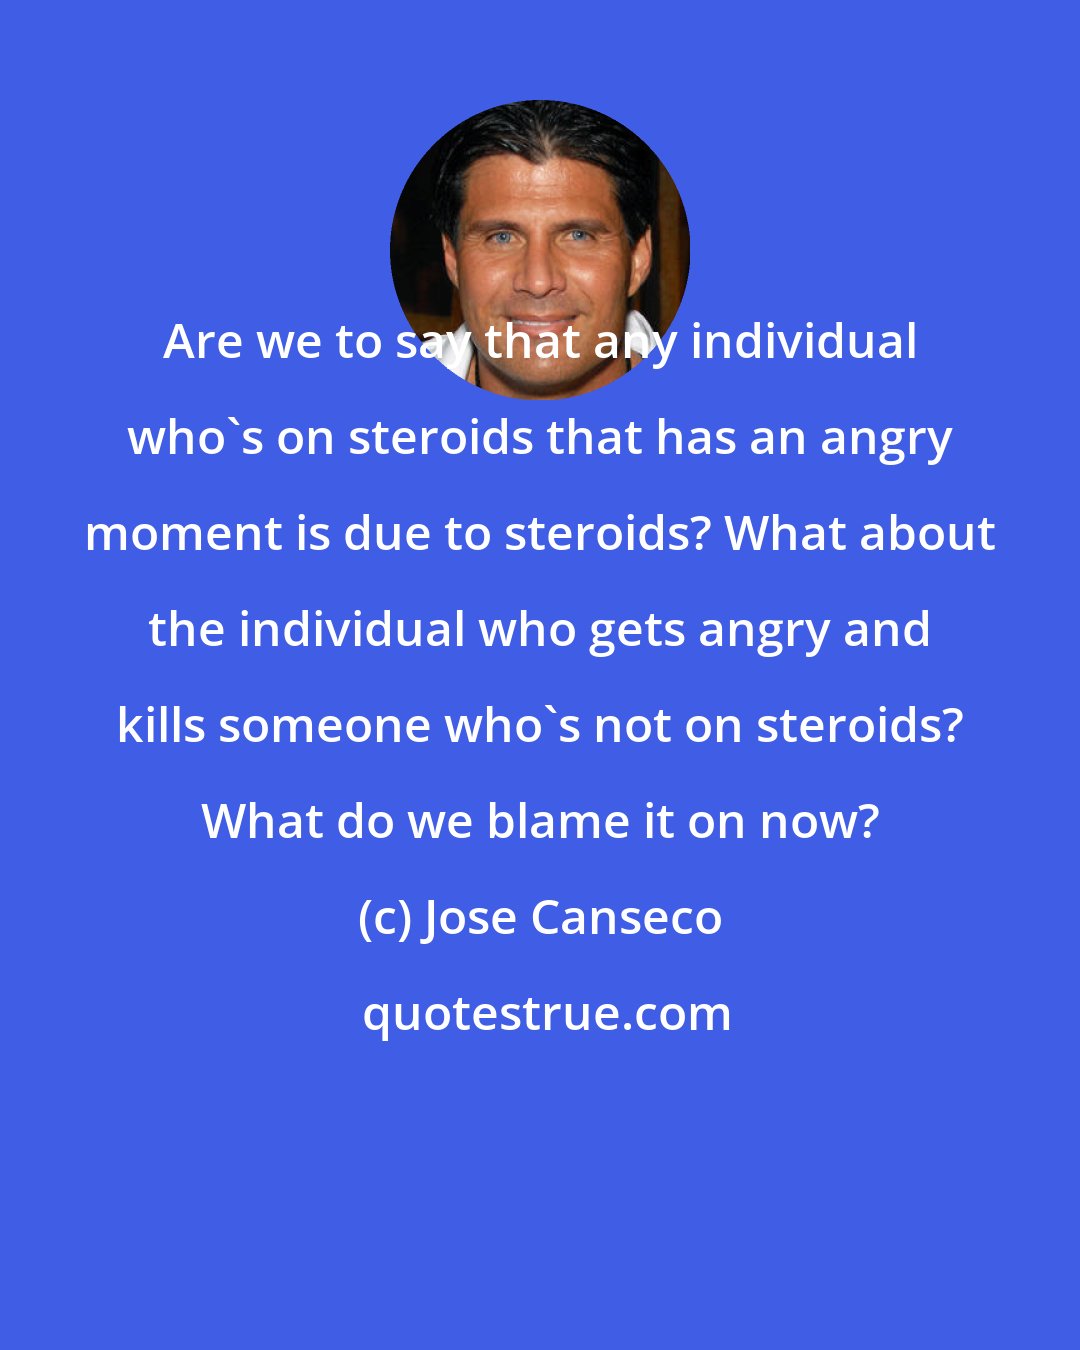 Jose Canseco: Are we to say that any individual who's on steroids that has an angry moment is due to steroids? What about the individual who gets angry and kills someone who's not on steroids? What do we blame it on now?